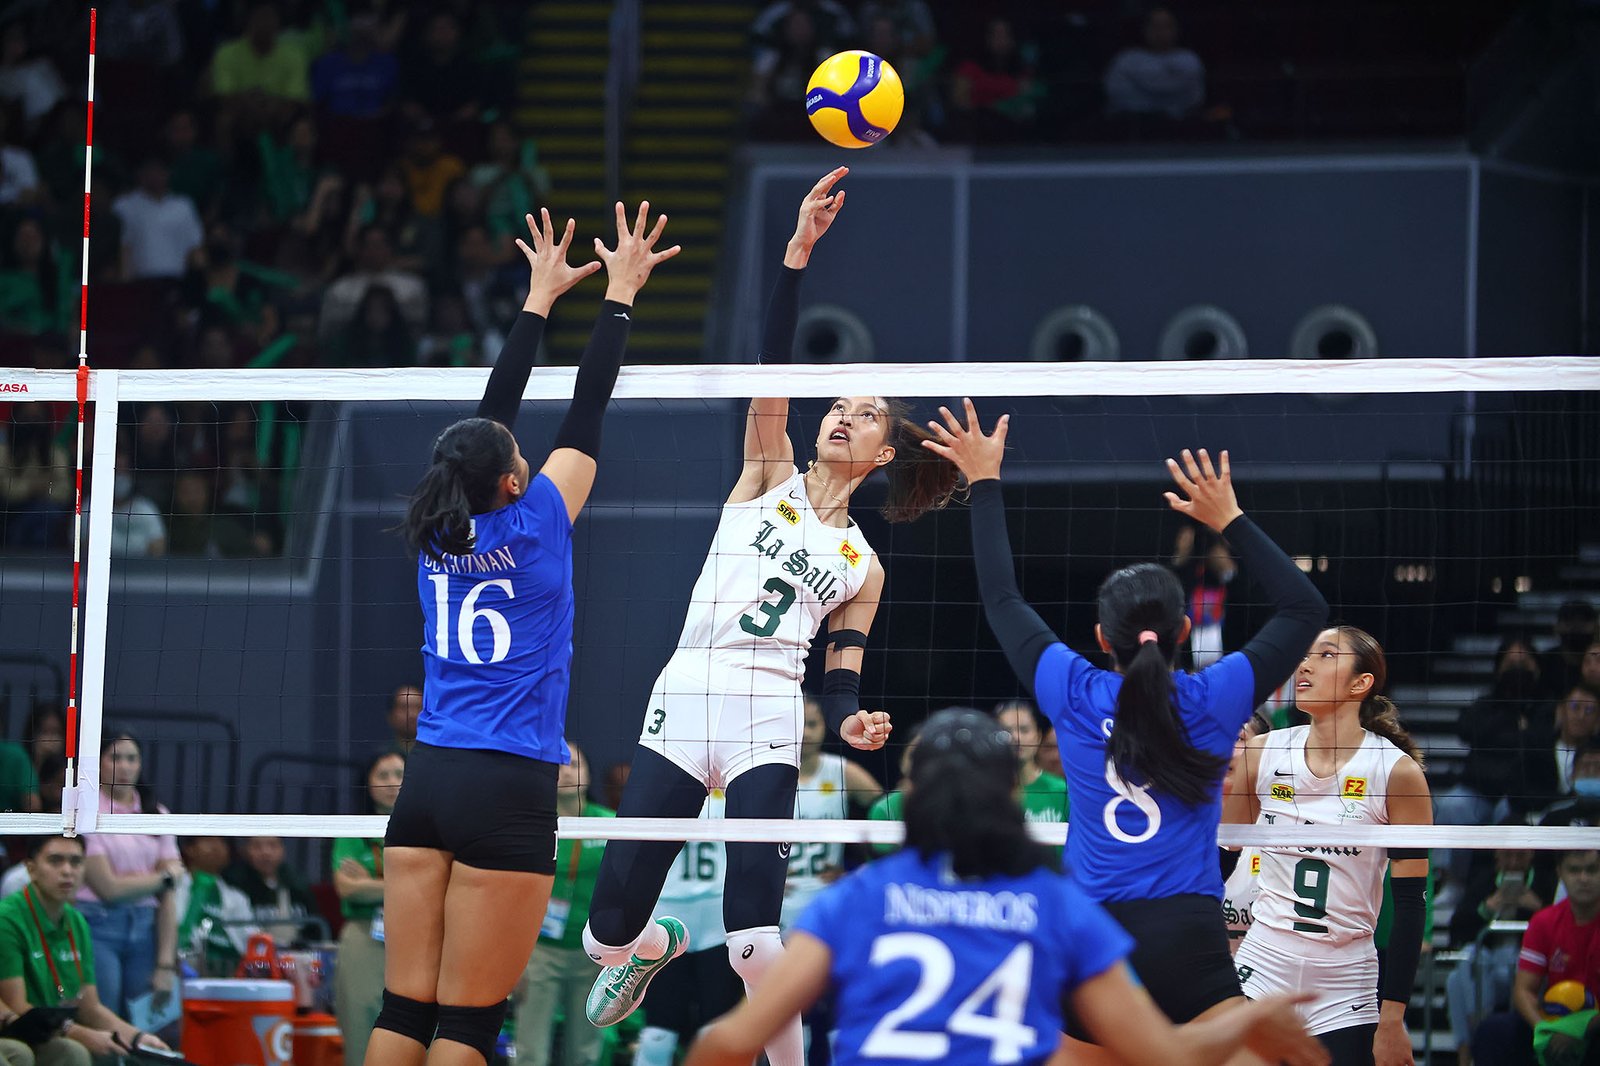 La Salle beats Ateneo for 14th straight time in UAAP volleyball